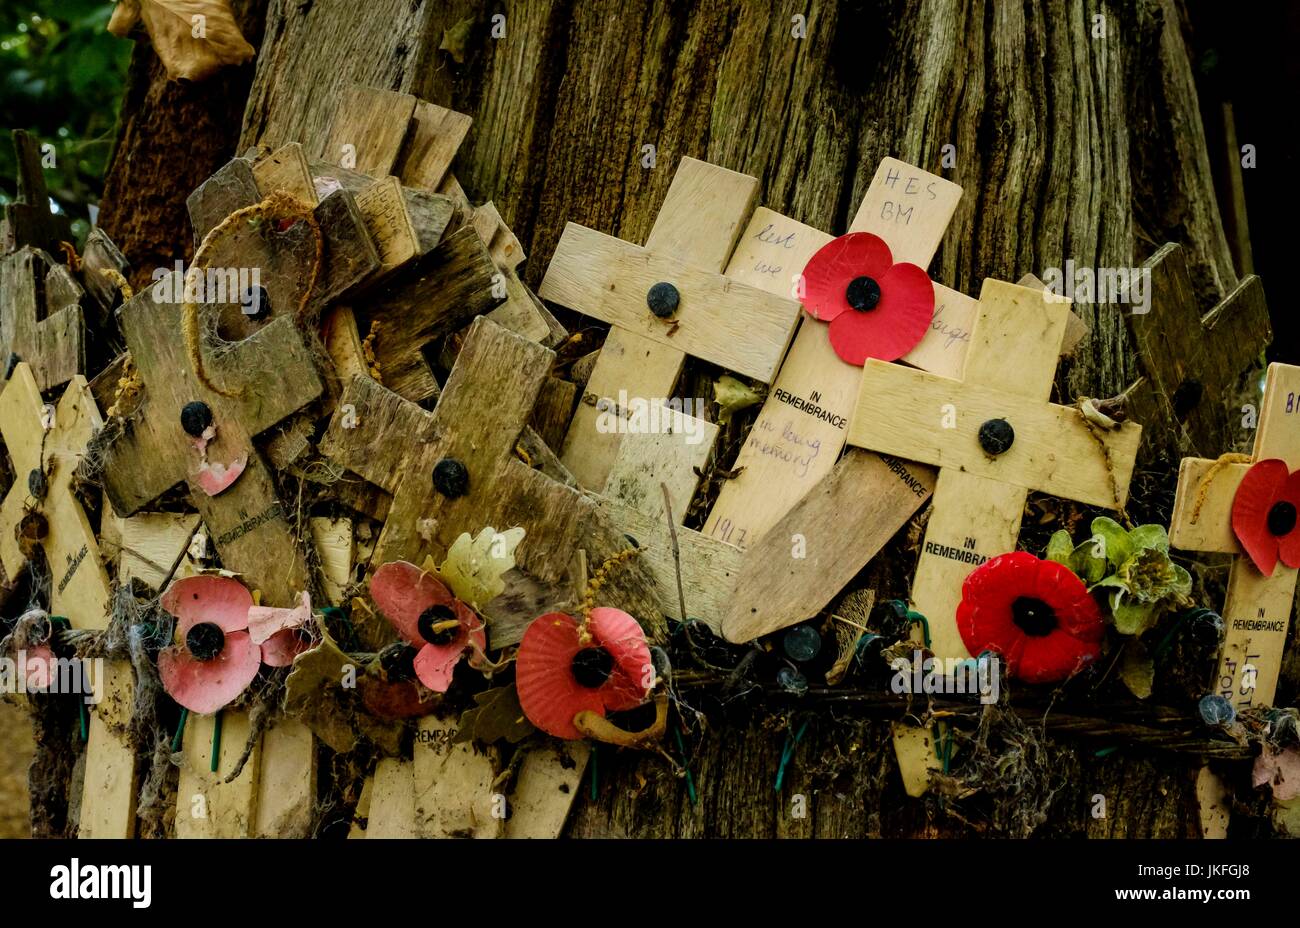 Sanctuary Wood near Passchendaele, Belgium 23rd July 2017 :: Remembrance crosses attached to a tree in Sanctuary Wood Near Passchendaele, Belgium.  31st of  July sees the start of commemorations to mark the 100th anniversary od the start of the battle of Passchendaele Credit: Andrew Wilson/Alamy Live News Stock Photo